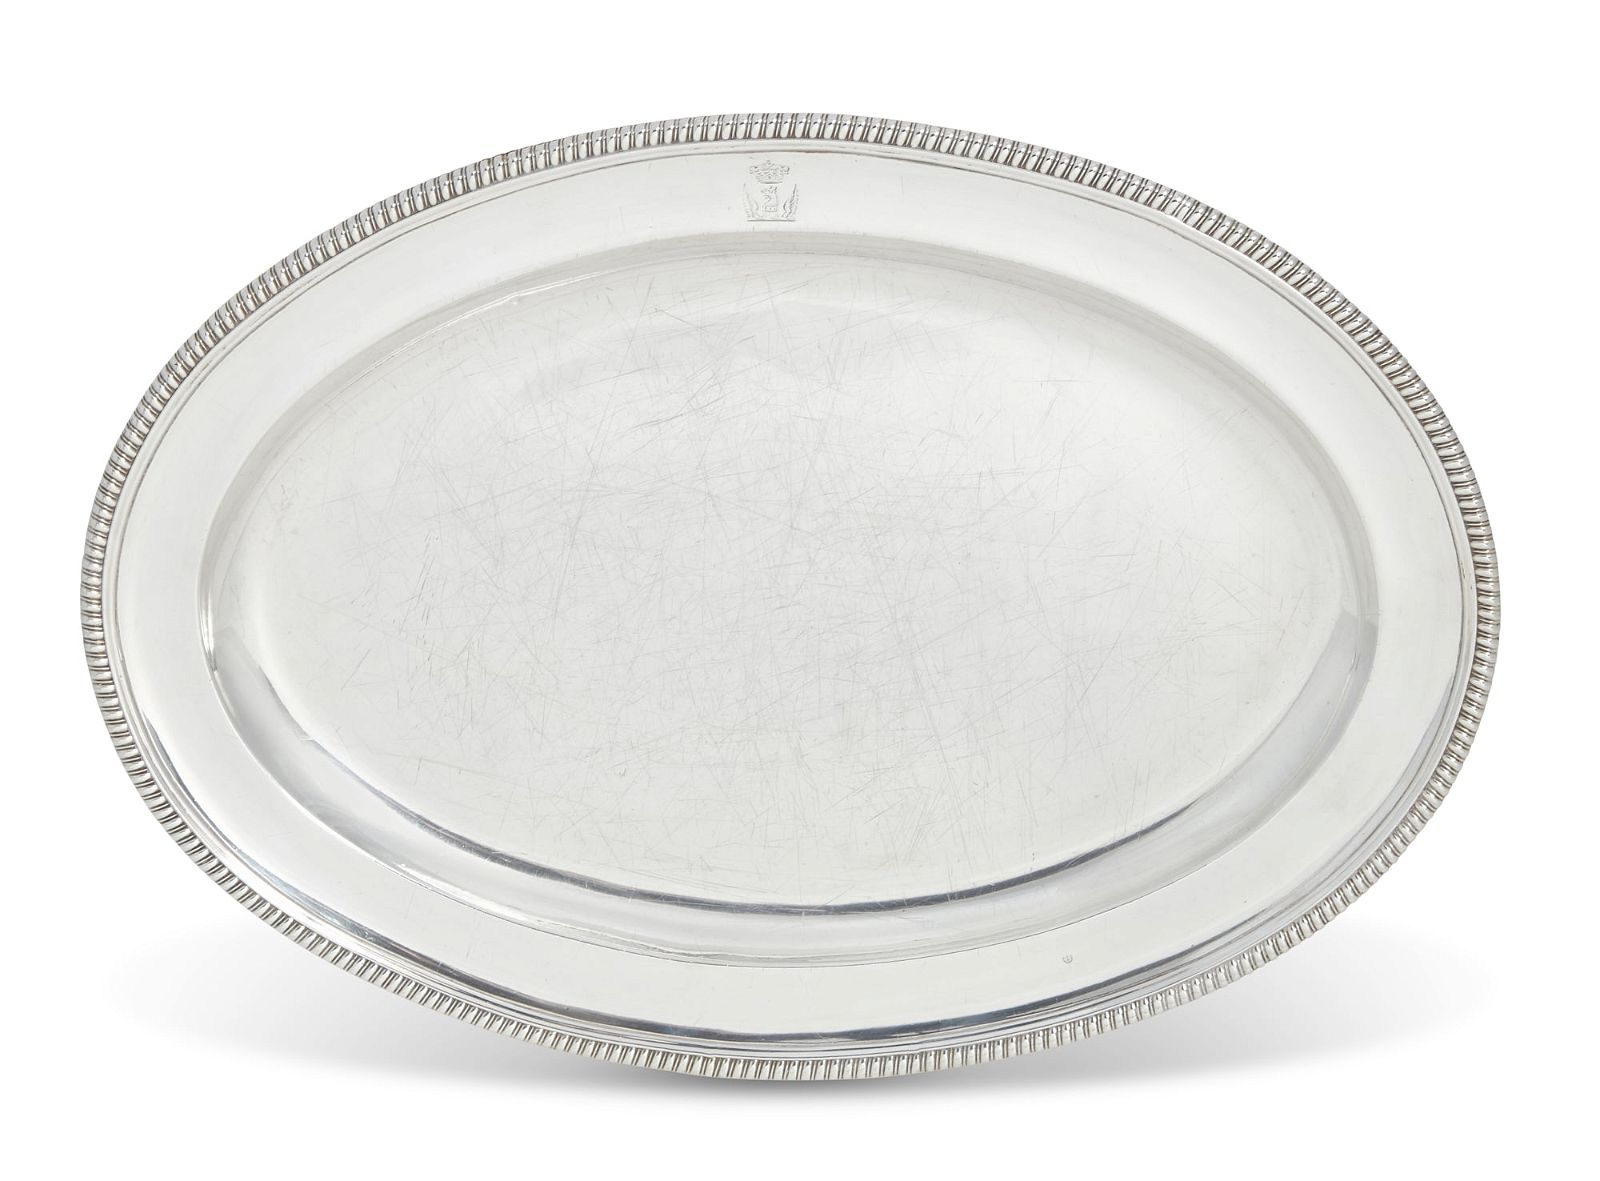 A GEORGE III STERLING SILVER OVAL